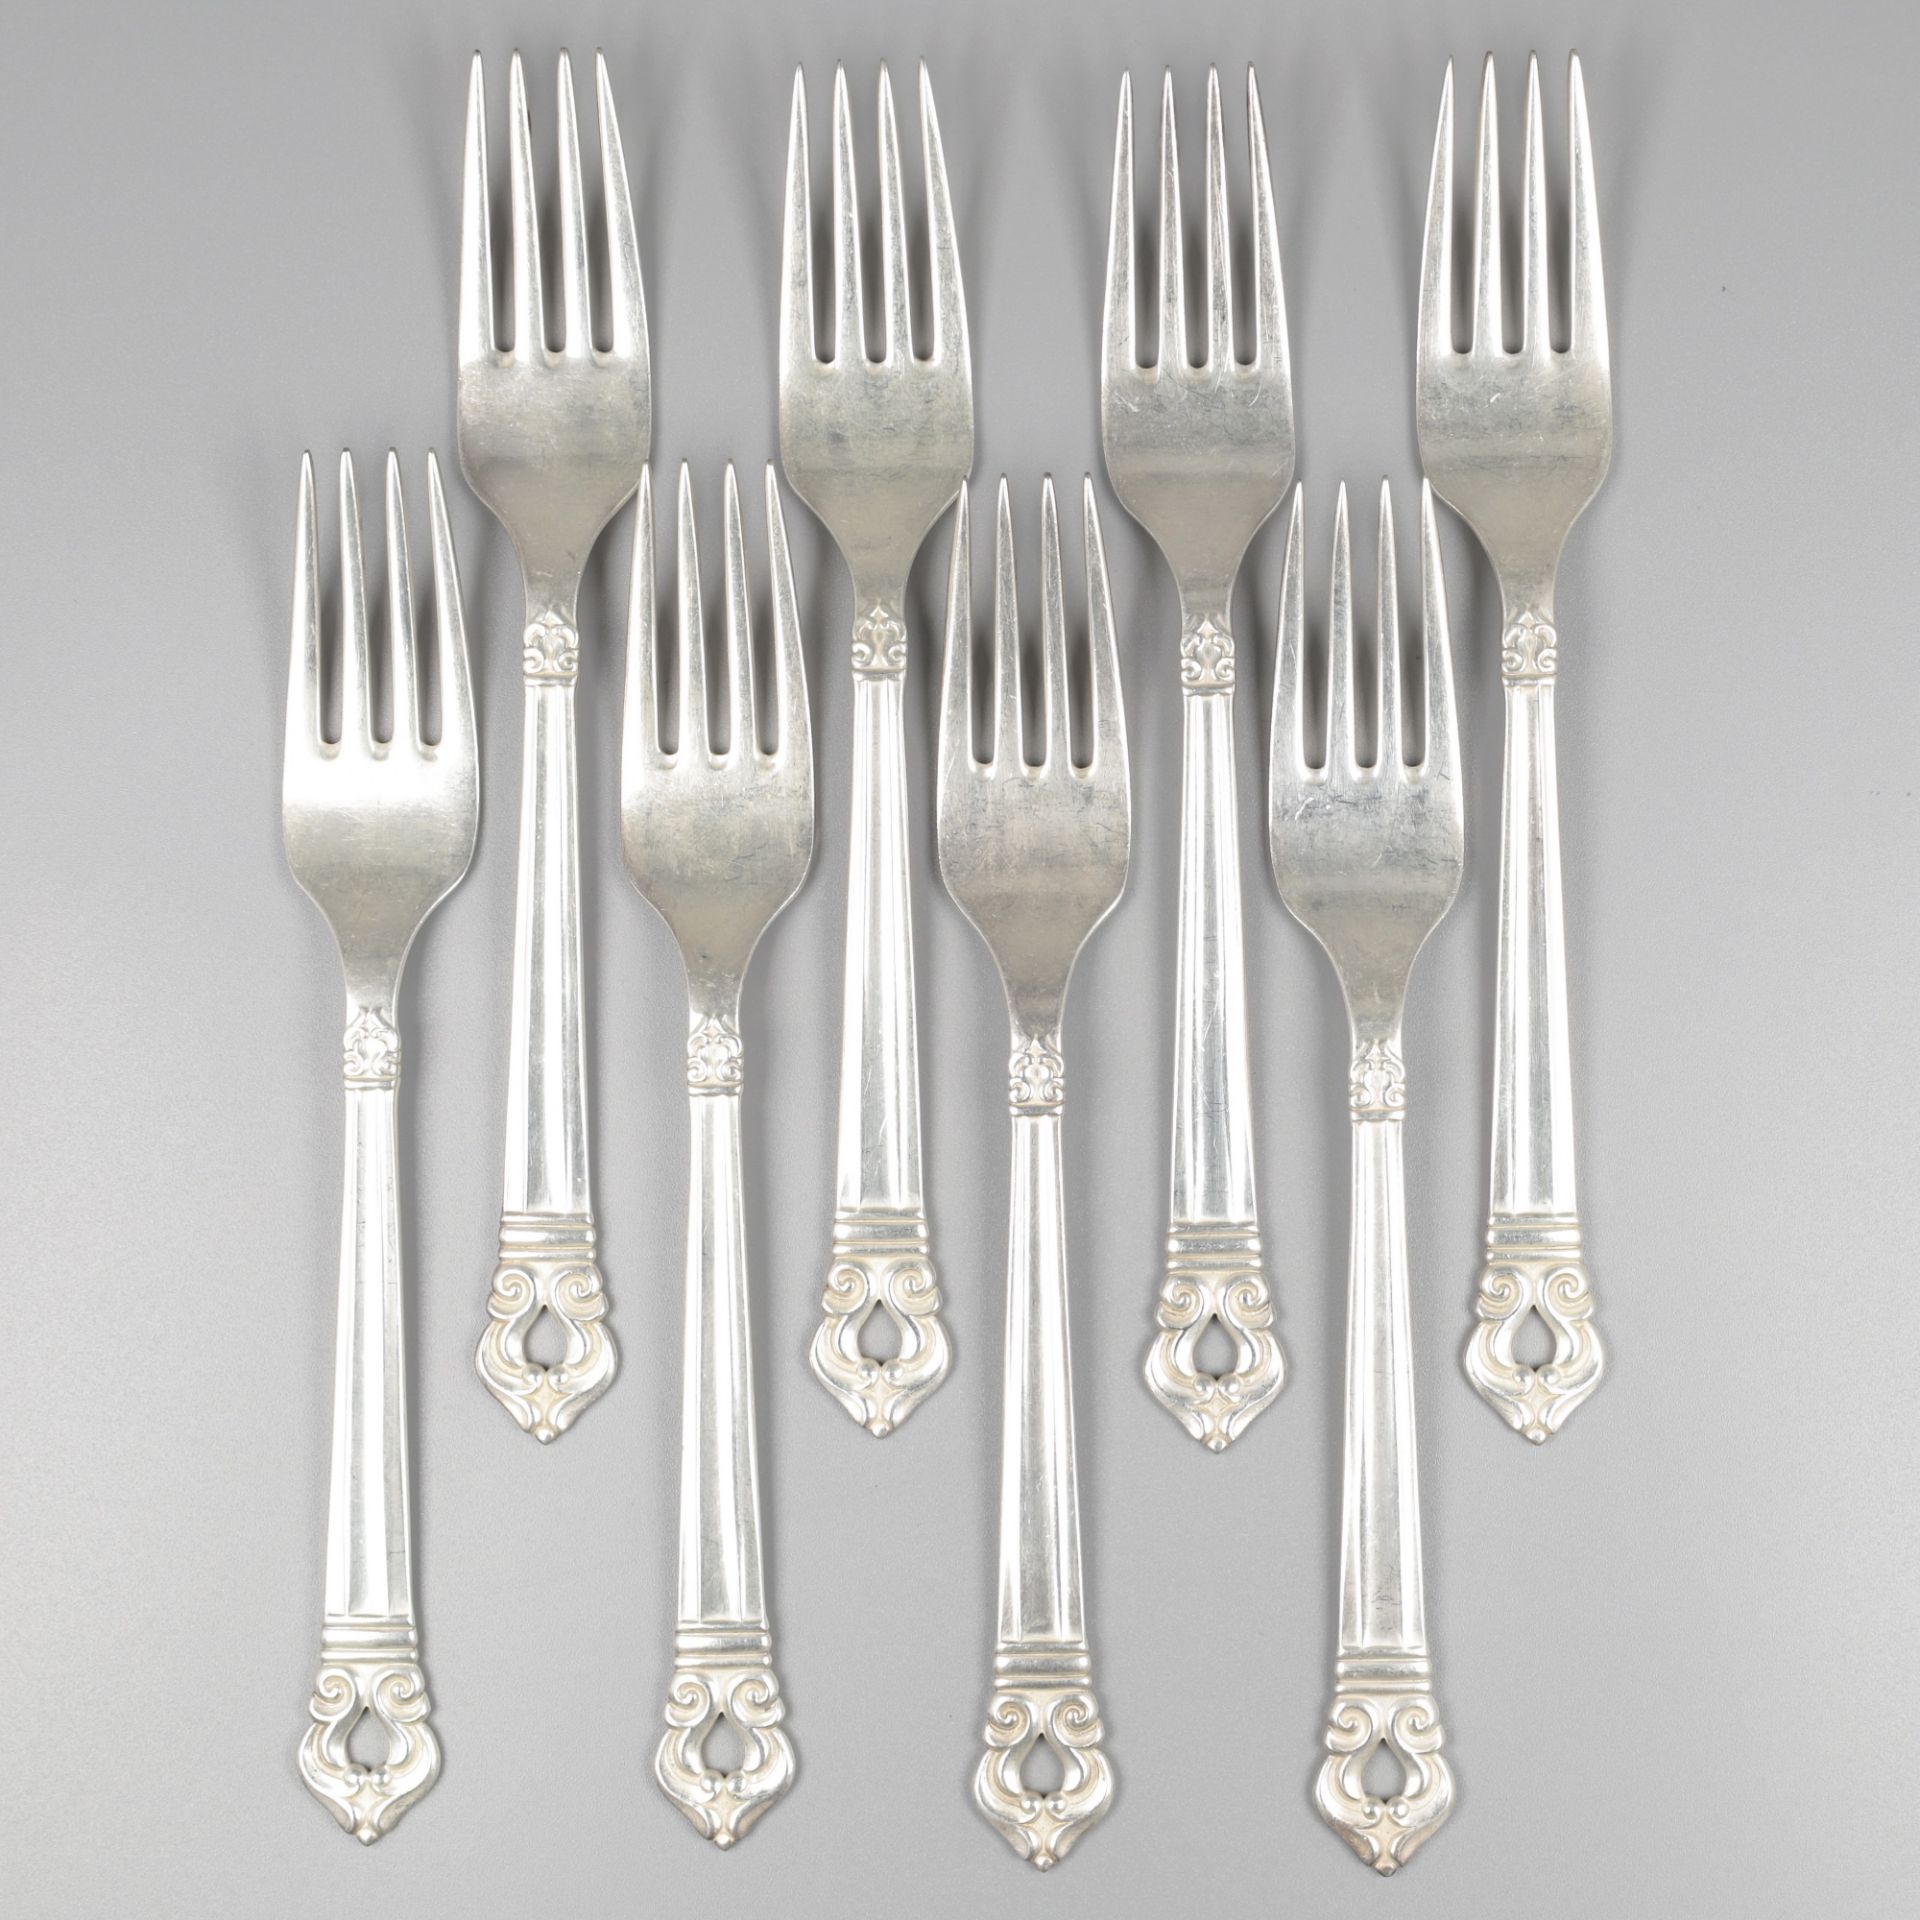 8-piece set of forks, model Royal Danish at Codan S.A. (Mexico), silver.